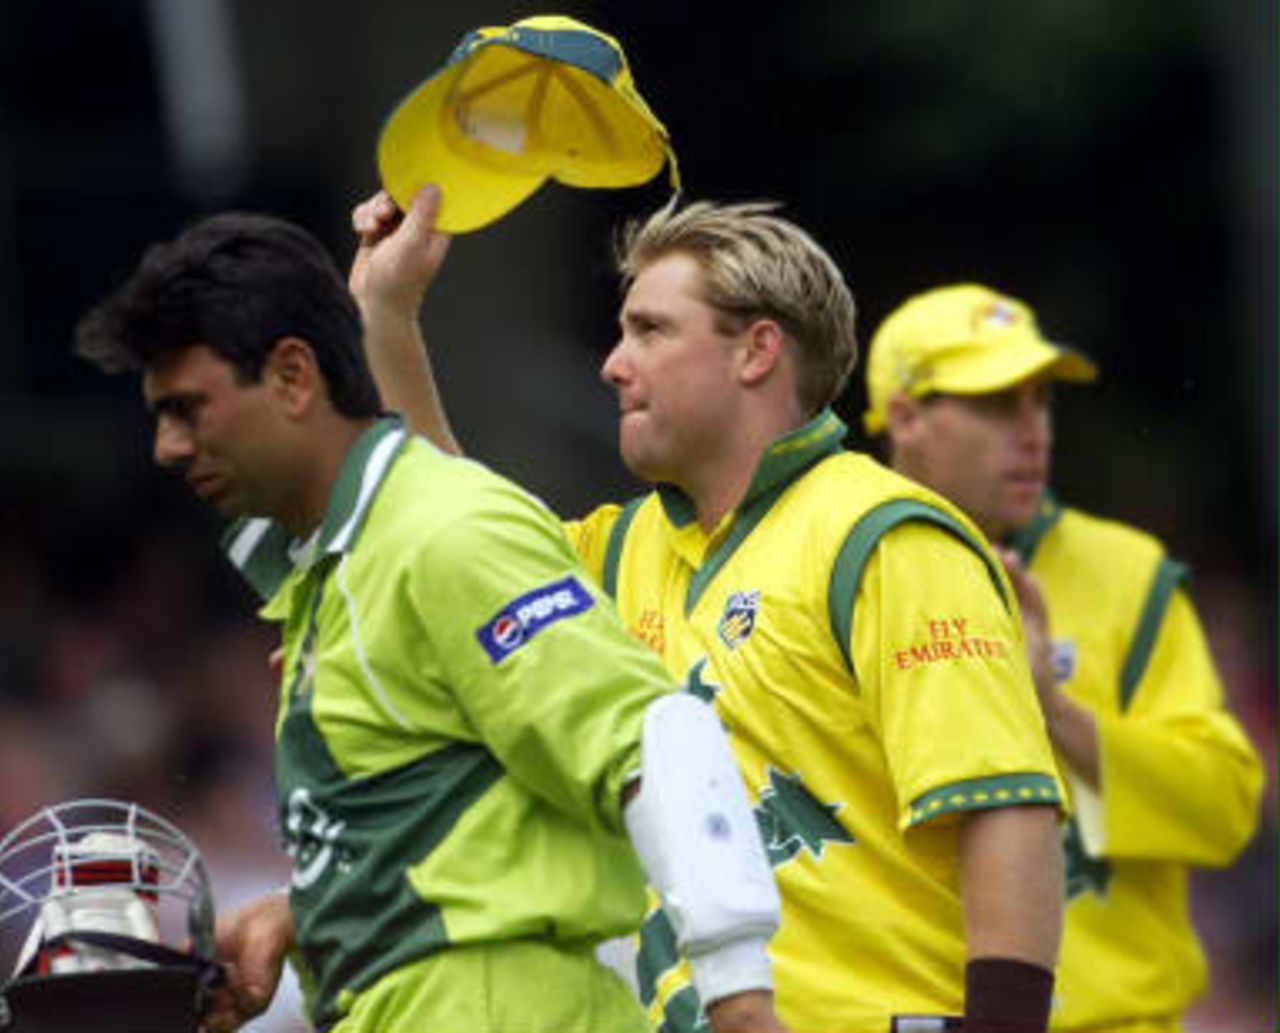 Shane Warne raises his hat as he leaves the field at the end of Pakistan's innings, to the applause of the crowd after taking four wickets 20 June 1999 during the Cricket World Cup final at Lord's